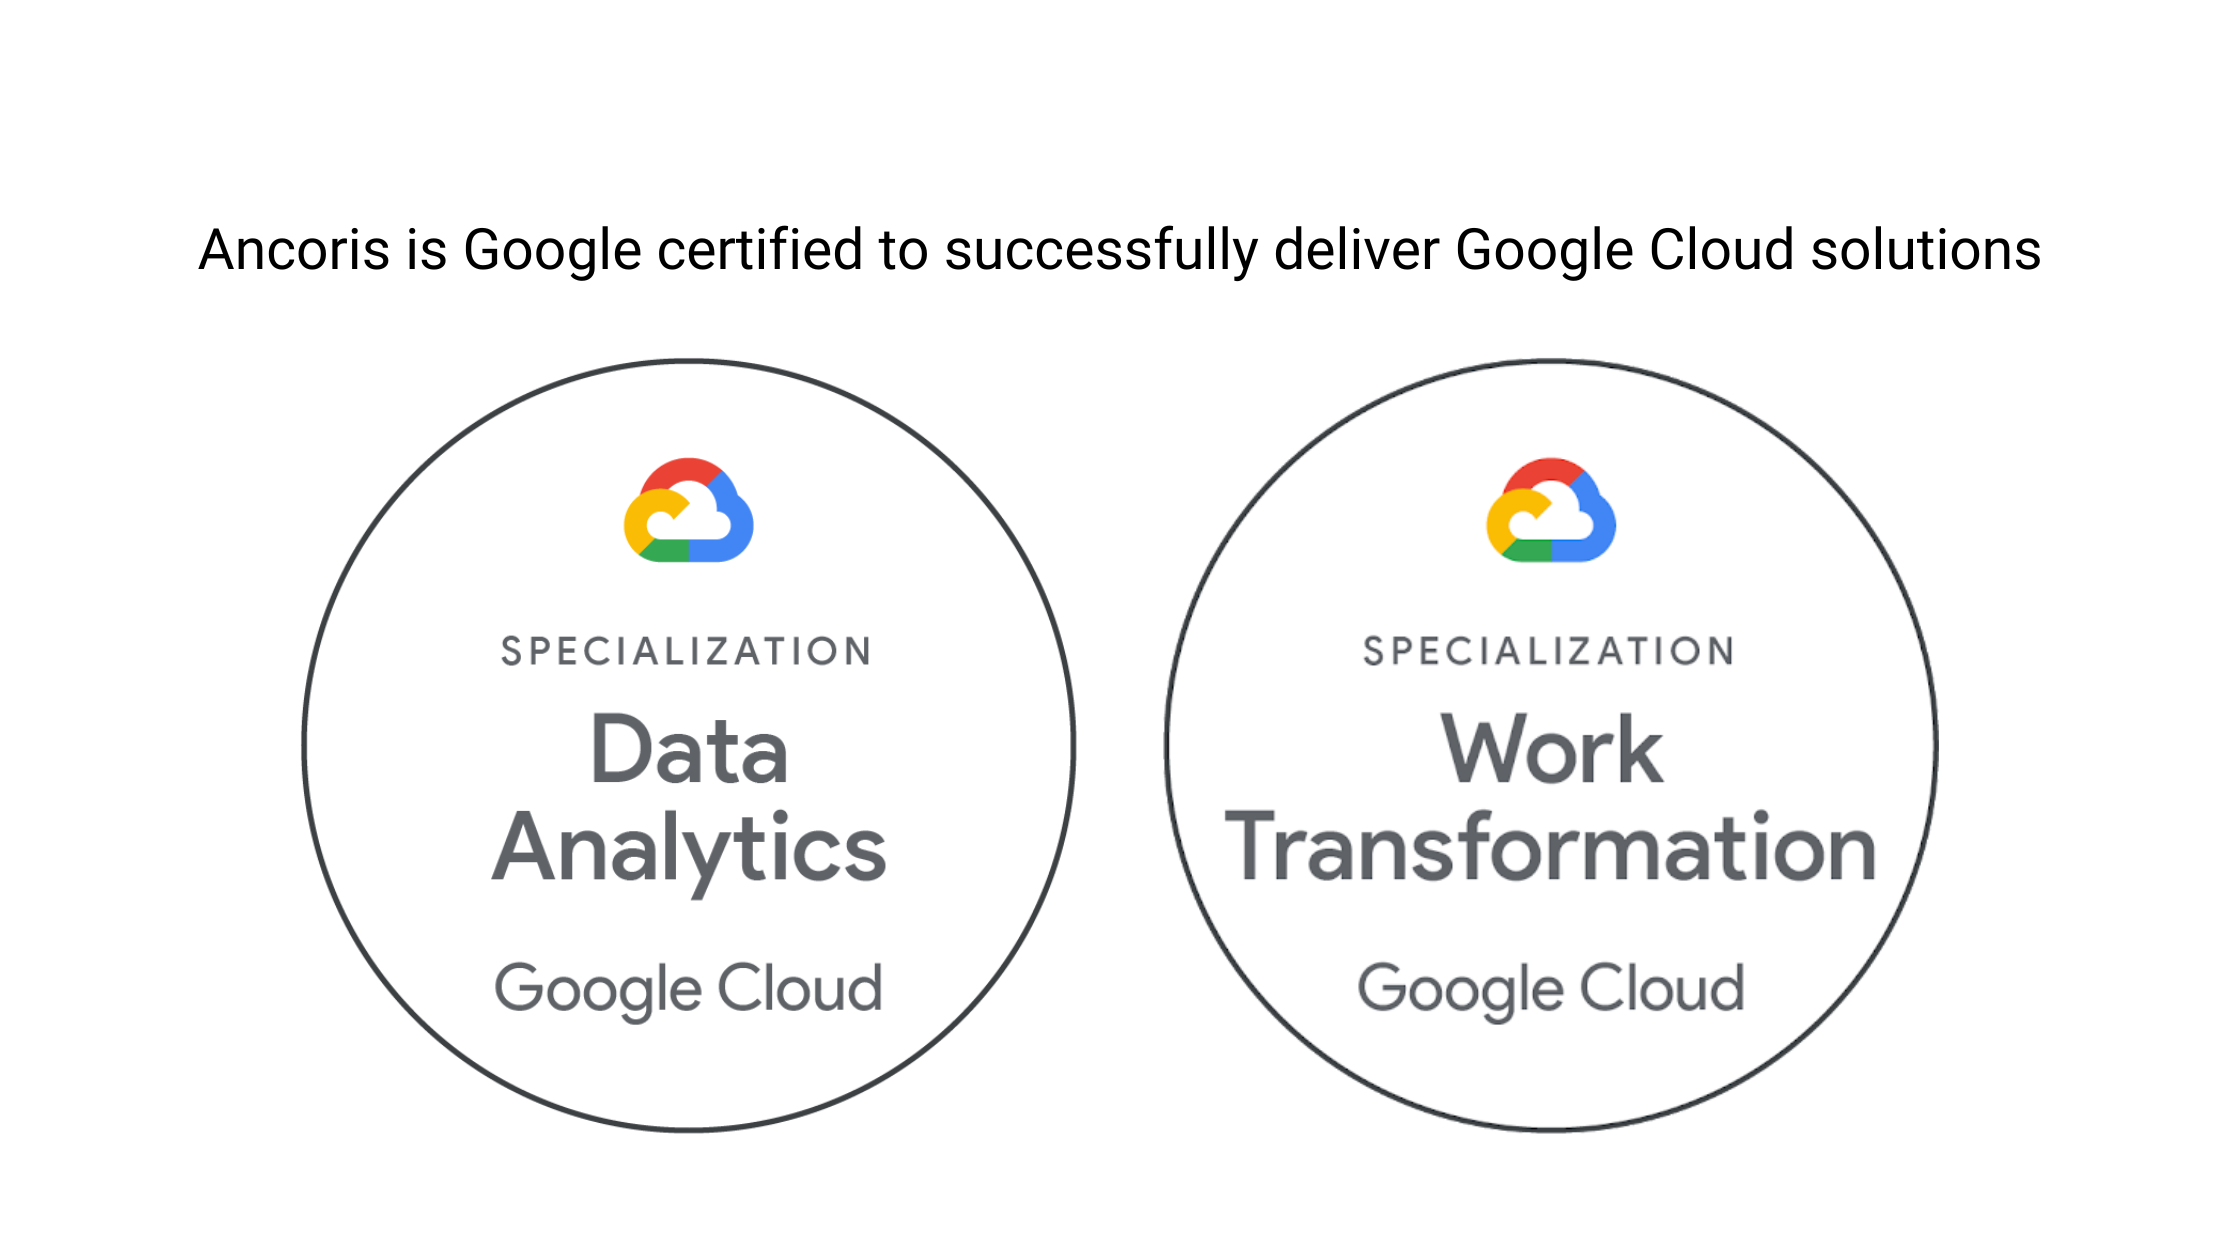 Ancoris is Google certified to successfully deliver Google Cloud solutions (1)